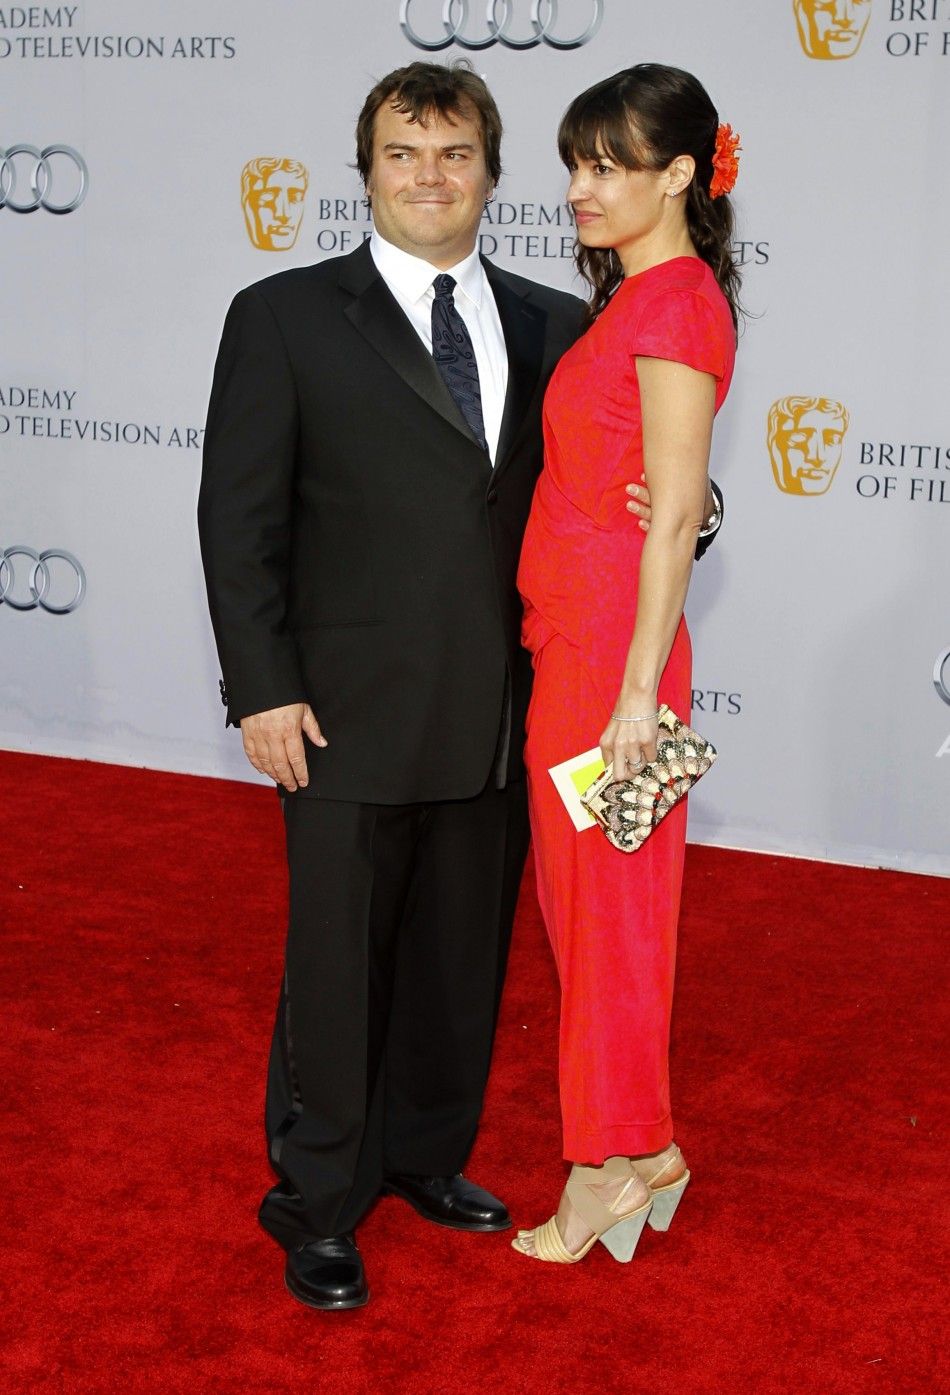  Actor Jack Black and wife Tanya arrive at the BAFTA Brits to Watch event in Los Angeles